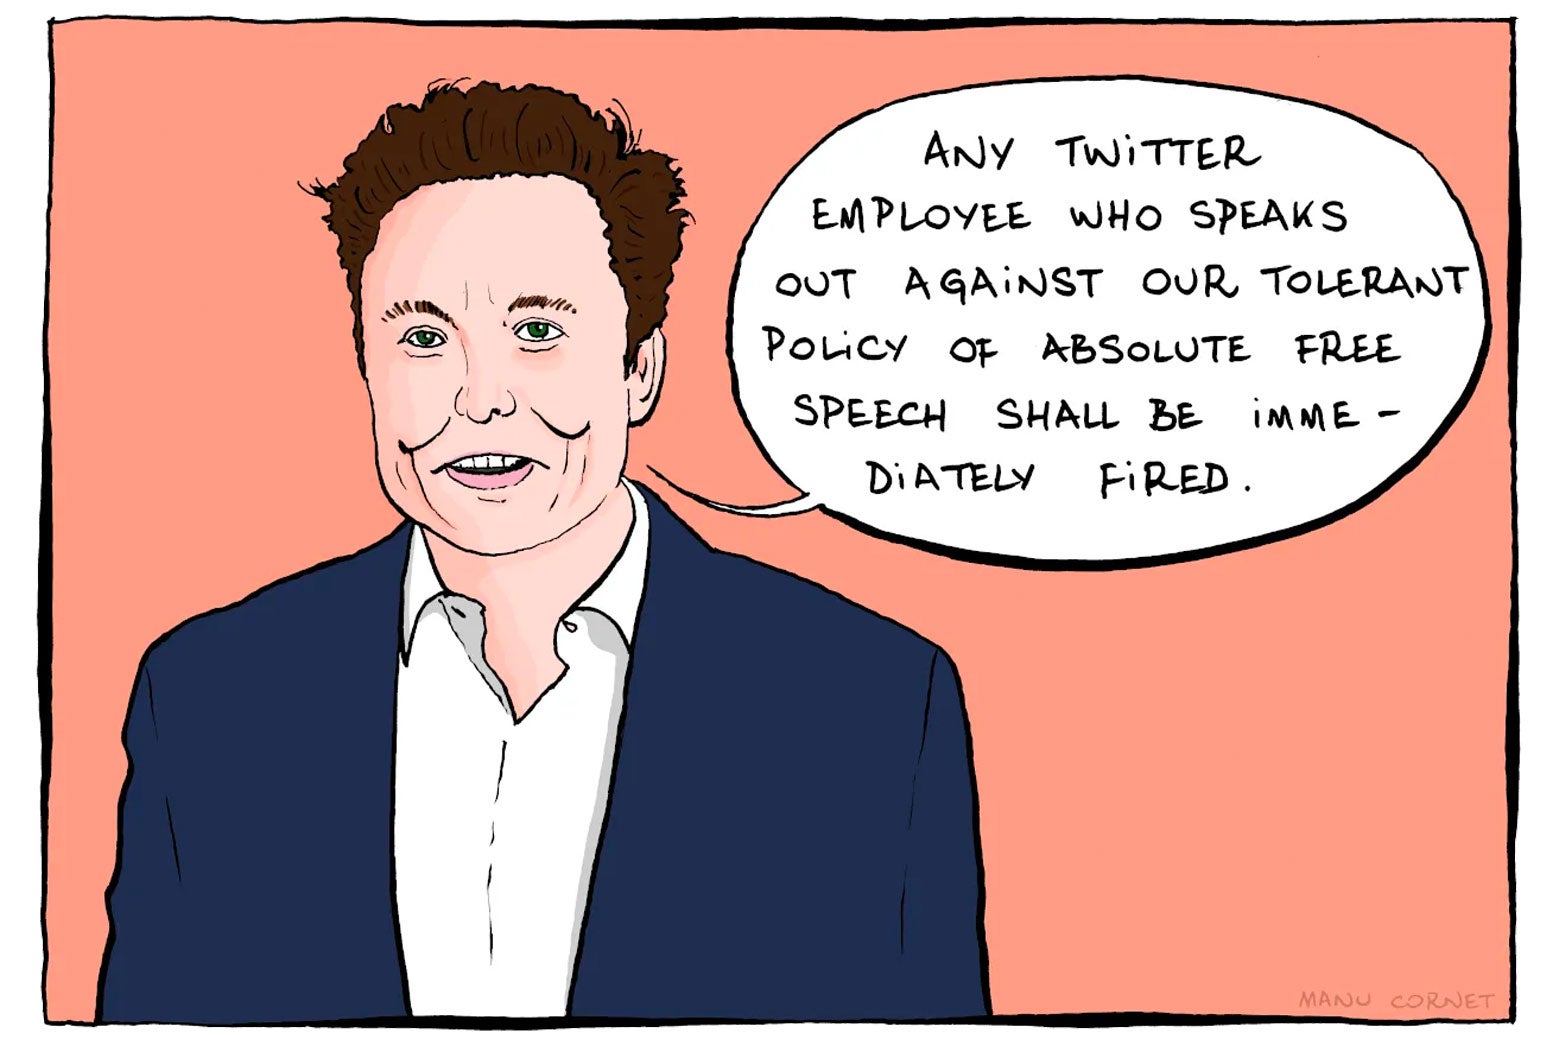 The Elon Musk cartoon makes a scary choice for Twitter workers.